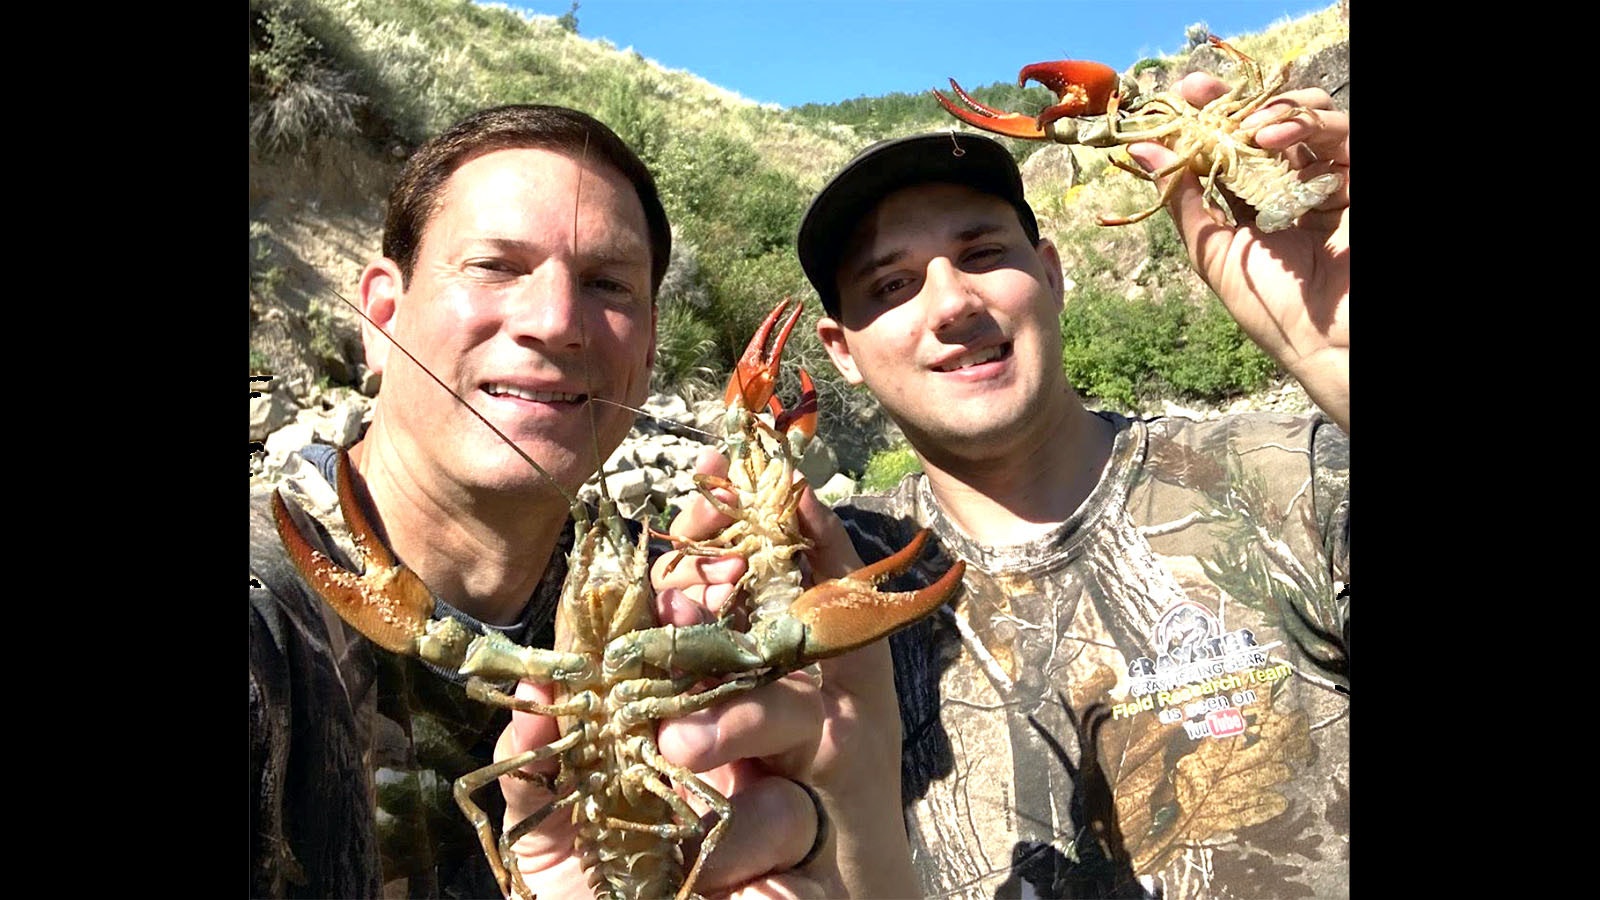 Mike Burell and his son Jake show some crayfish they caught in eastern Idaho. Burrell says Wyoming is a great place to catch crayfish too.